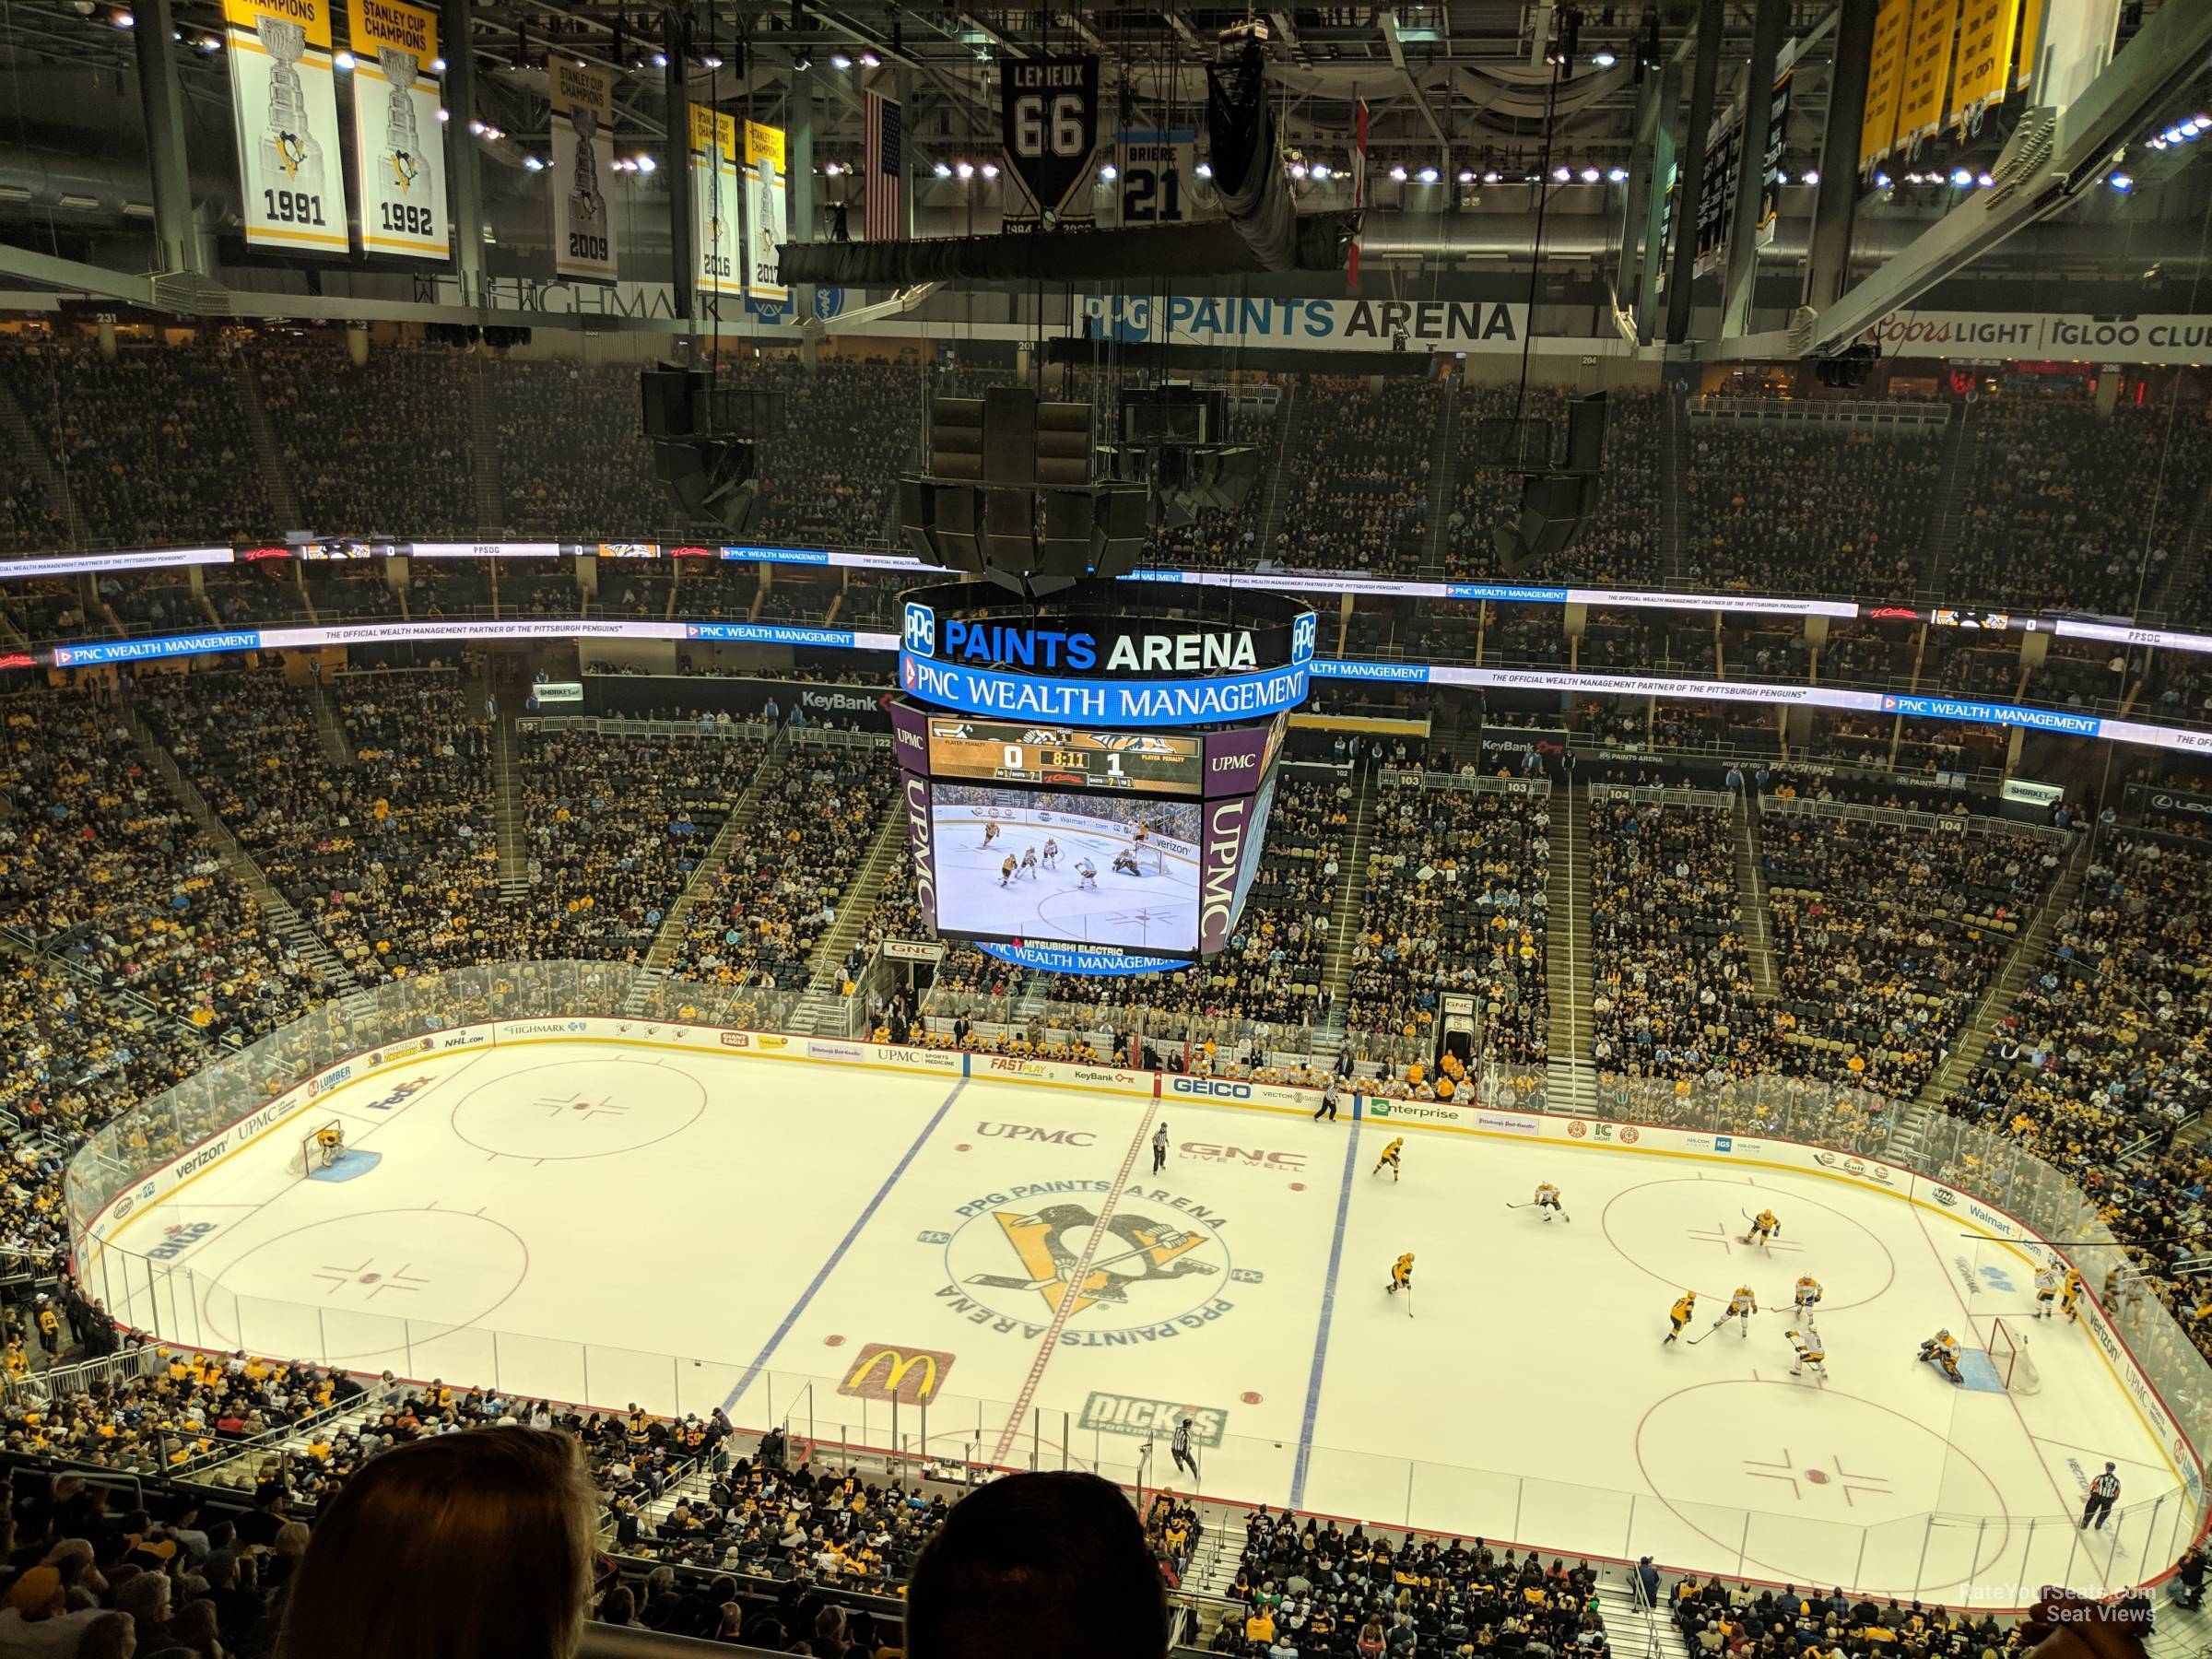 section 218, row q seat view  for hockey - ppg paints arena